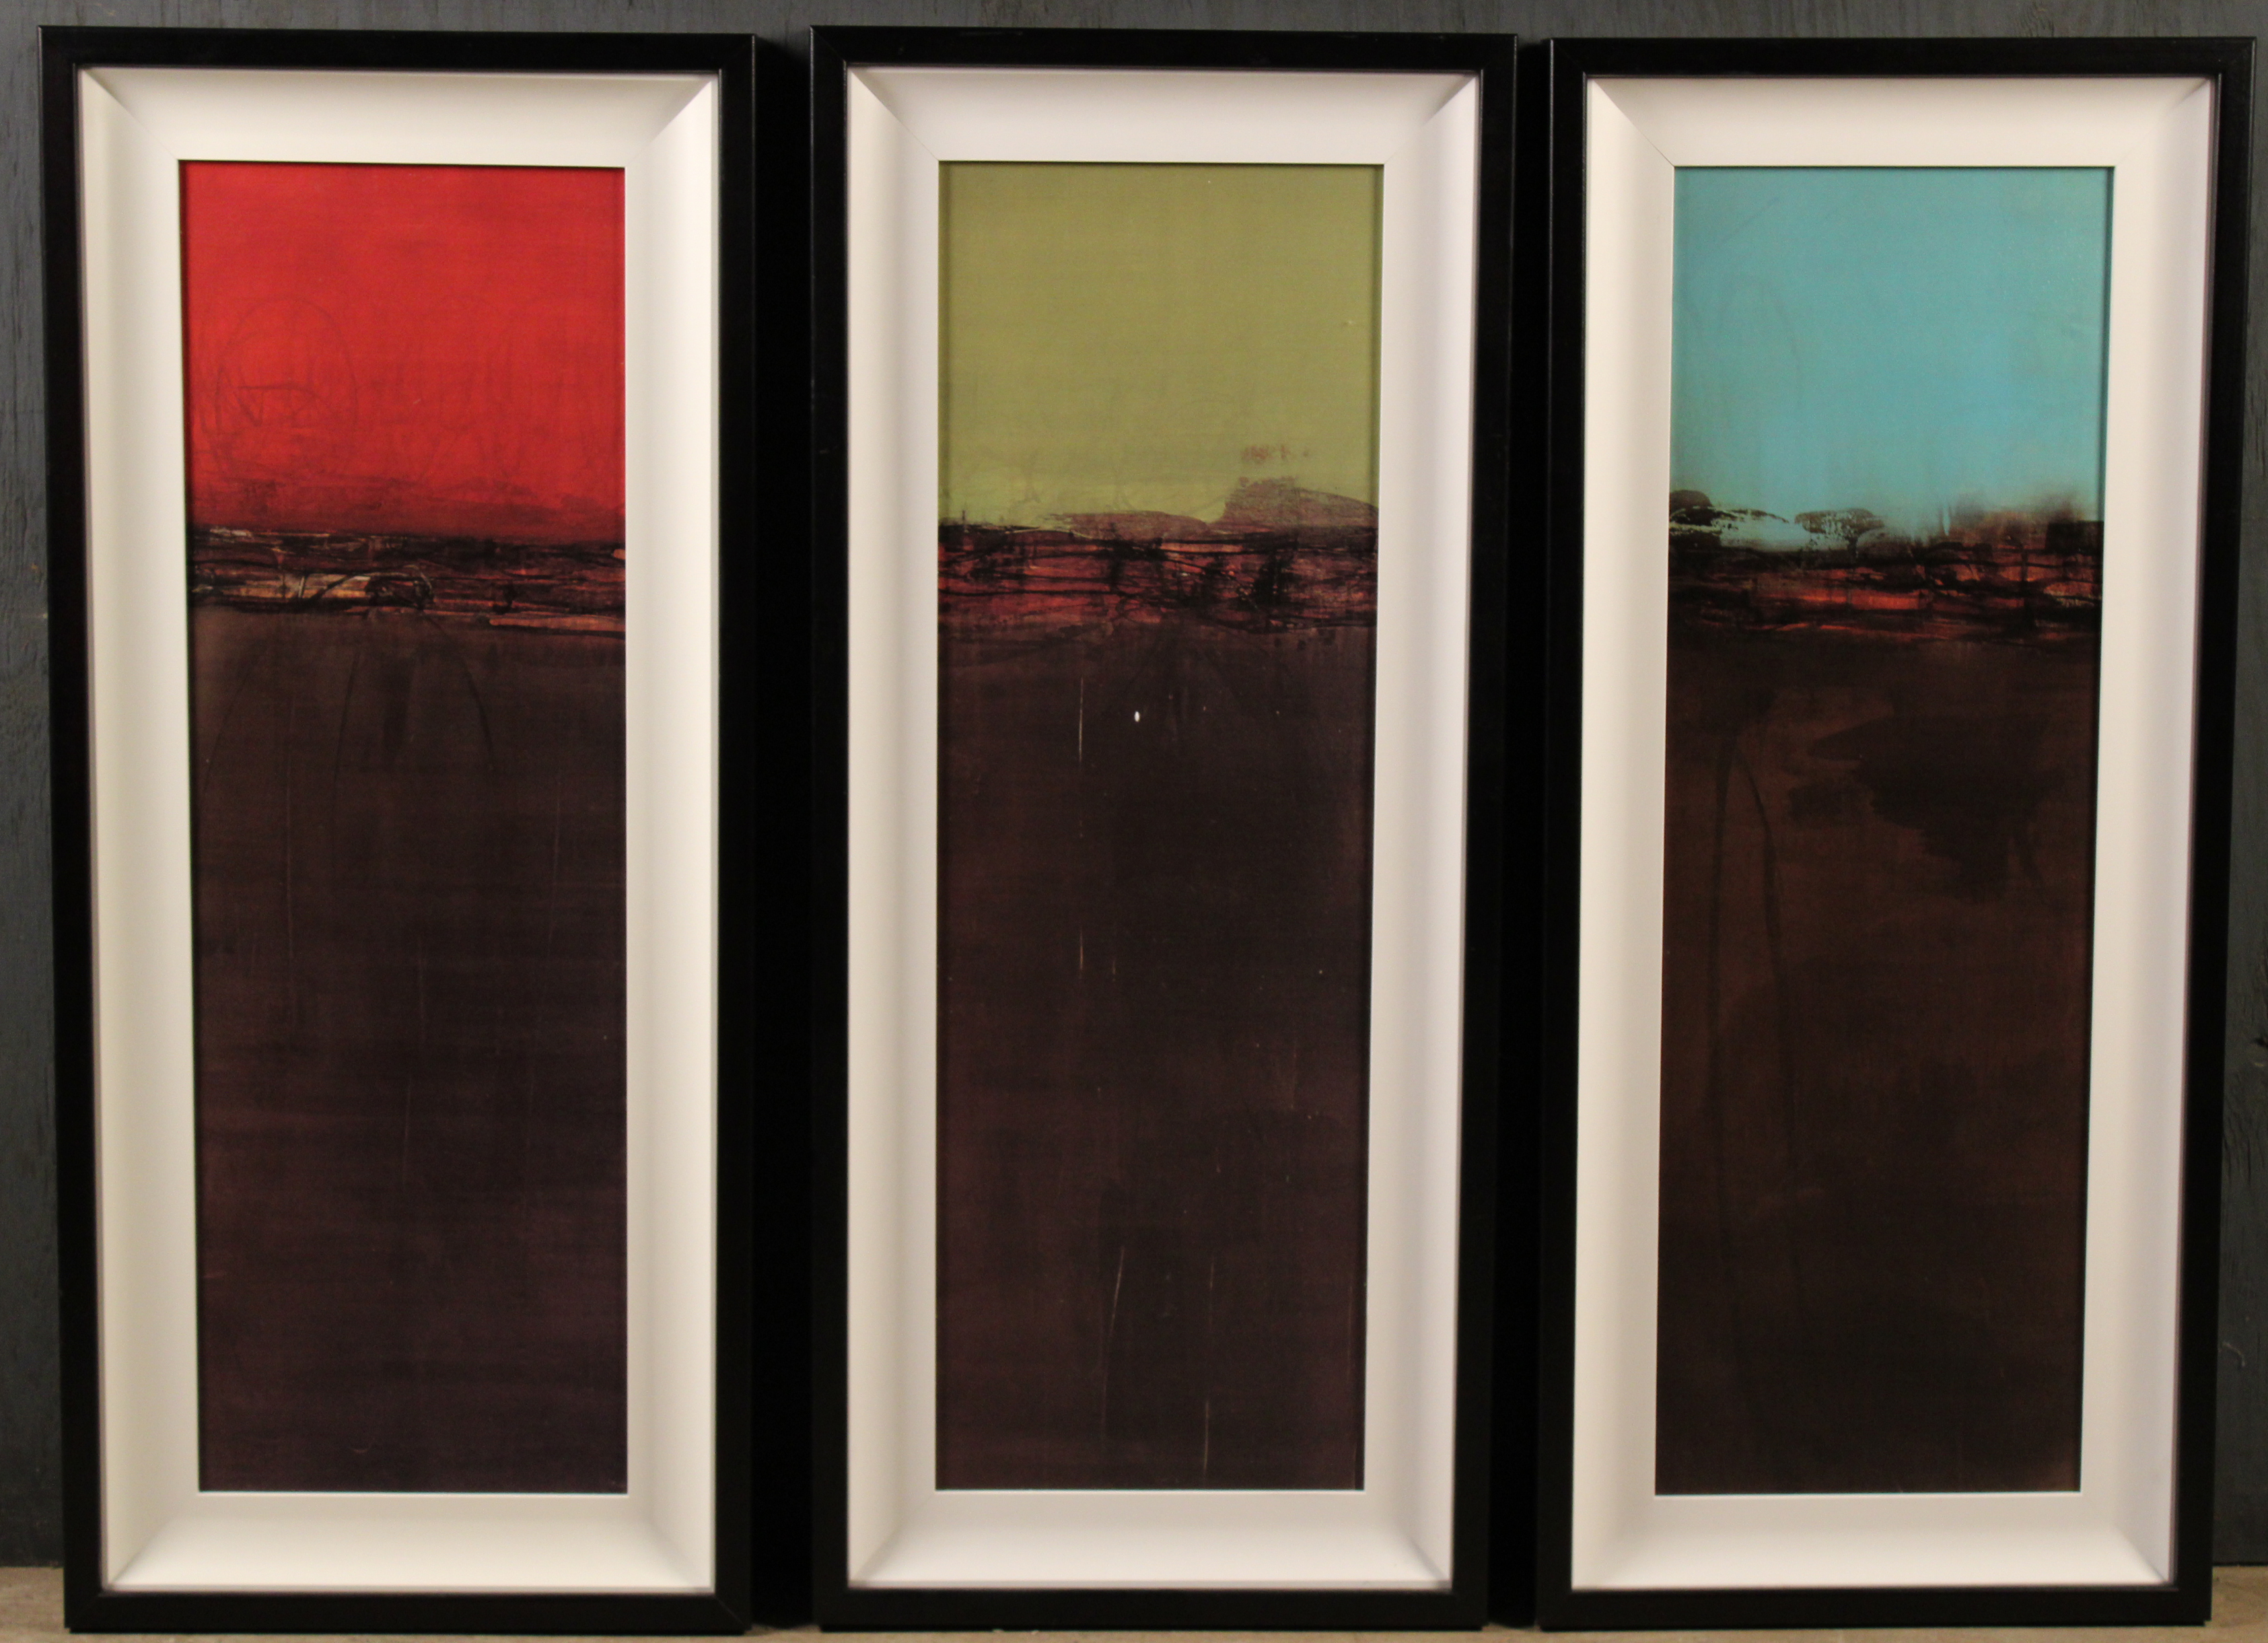 ABSTRACT TRIPTYCH IN FRAME ABSTRACT 35fcb5